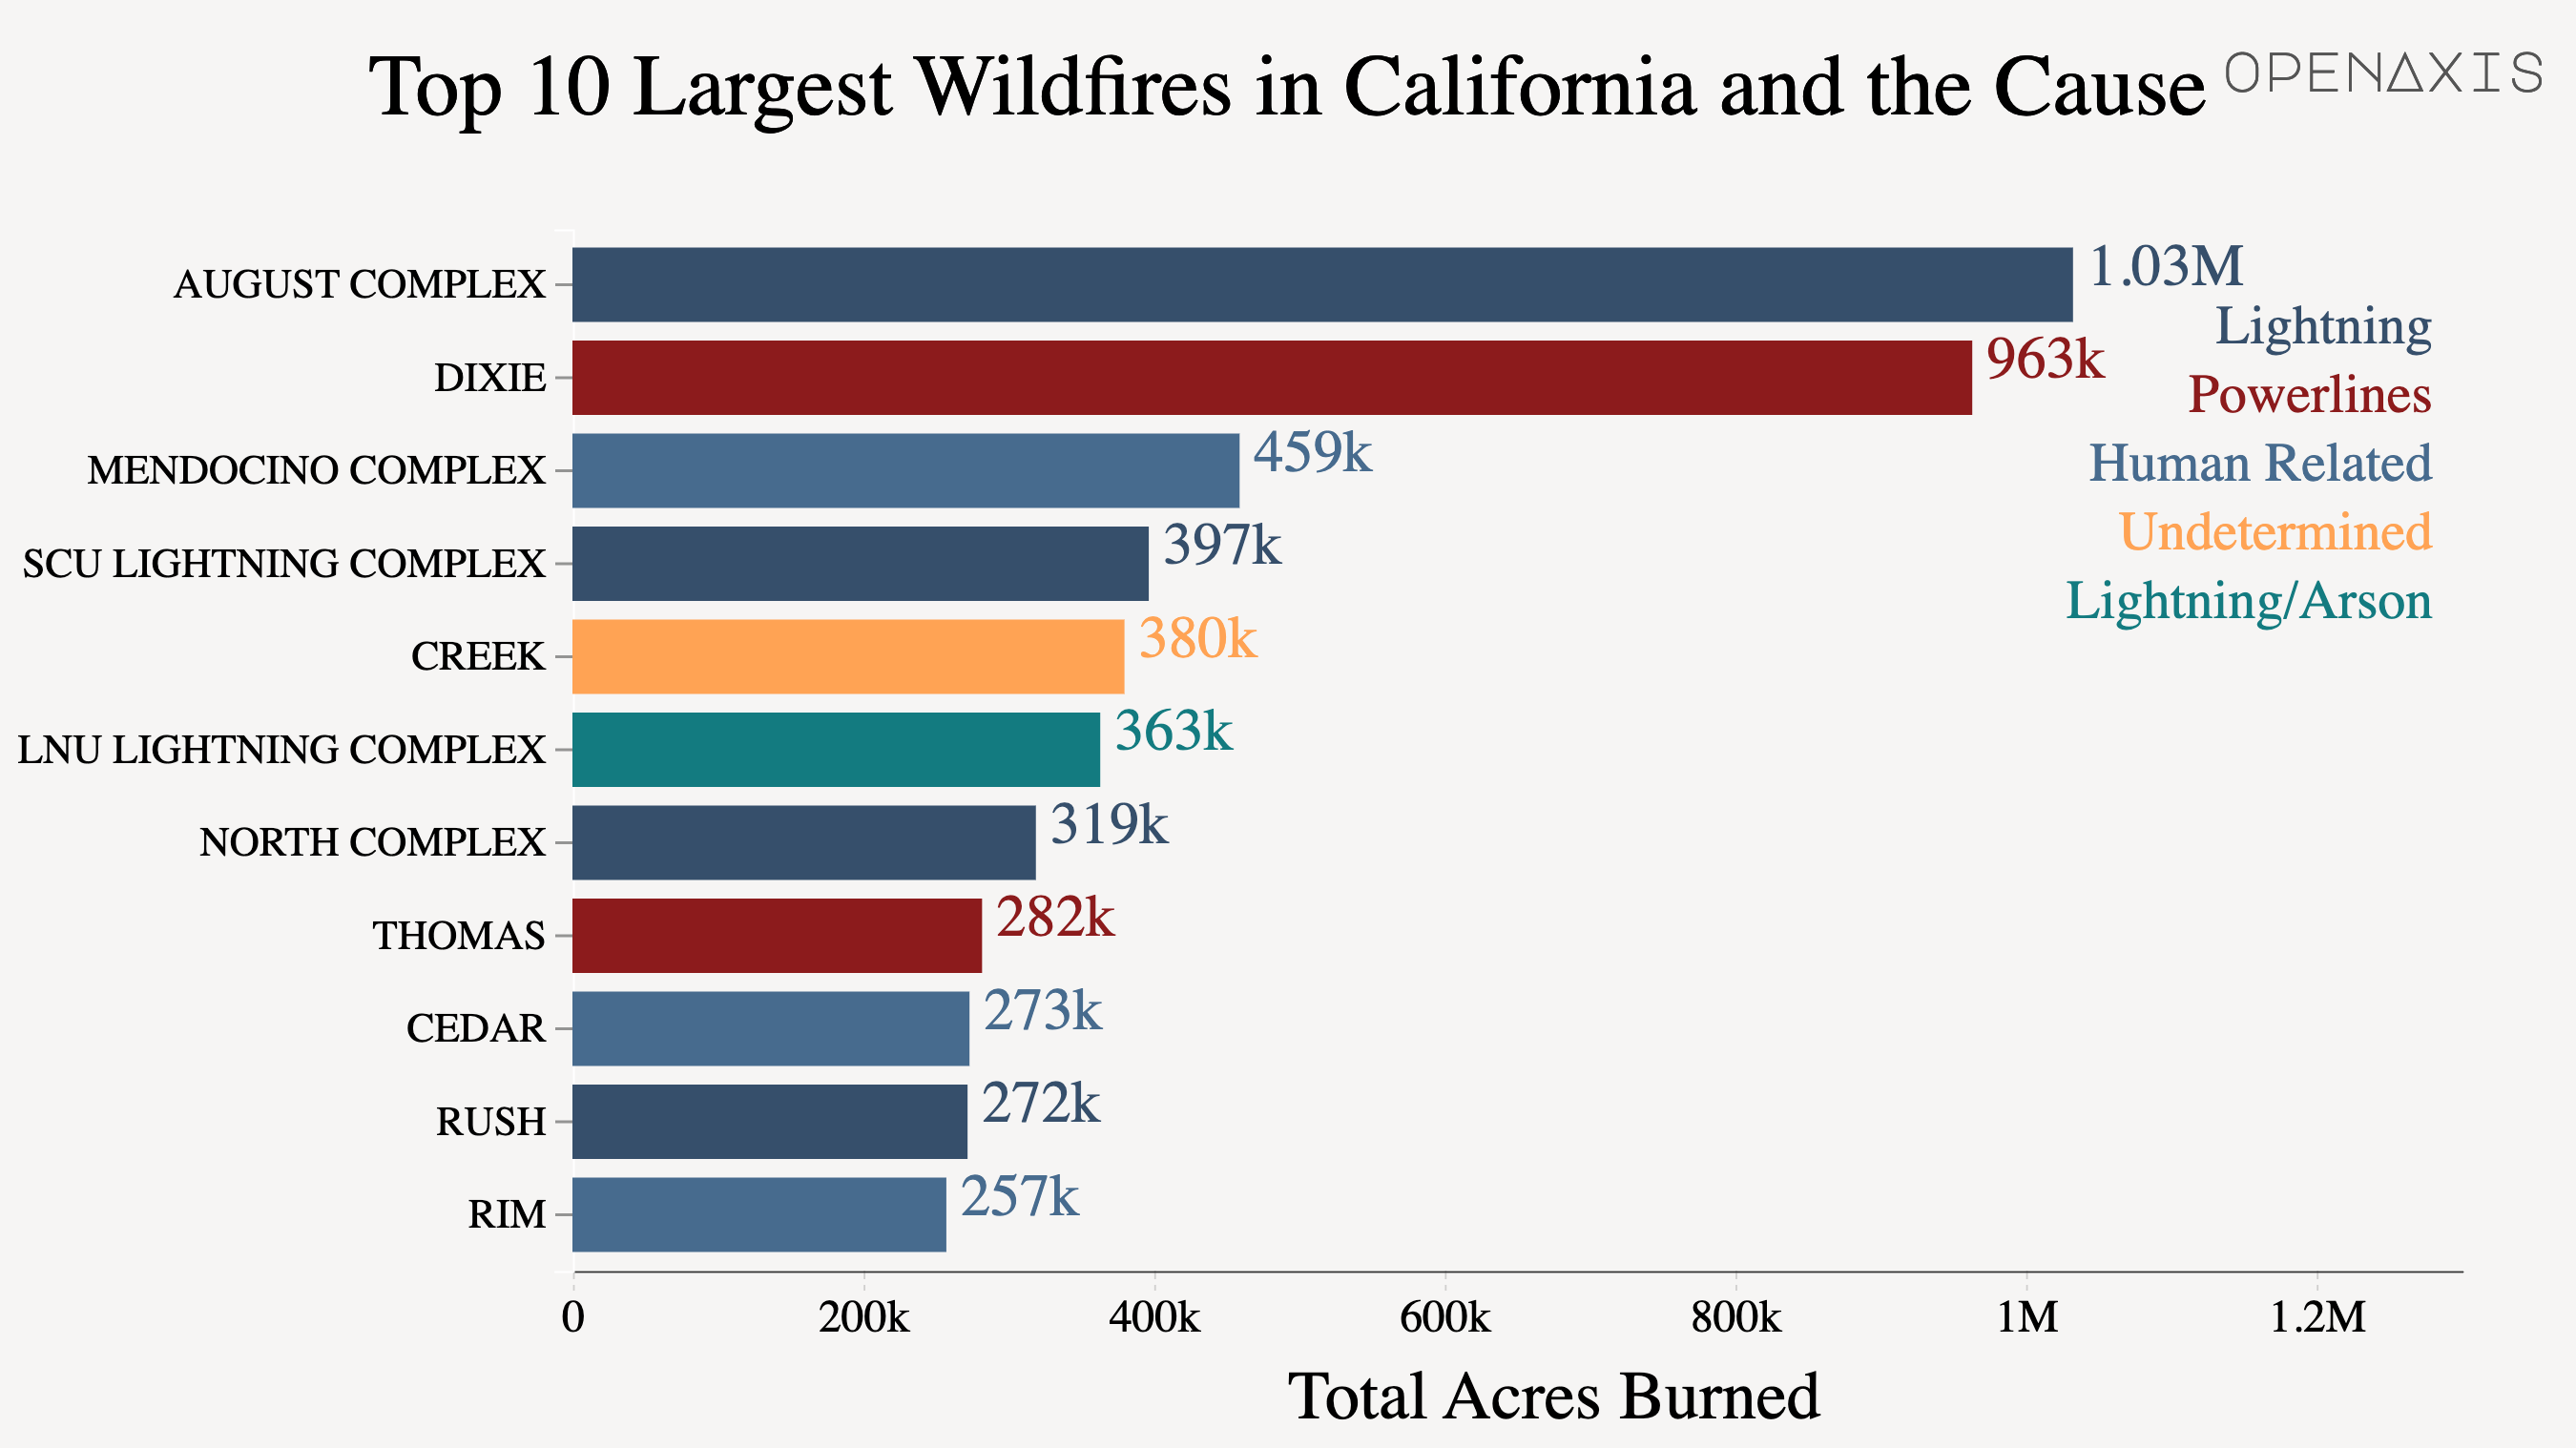 "Top 10 Largest Wildfires in California and the Cause"